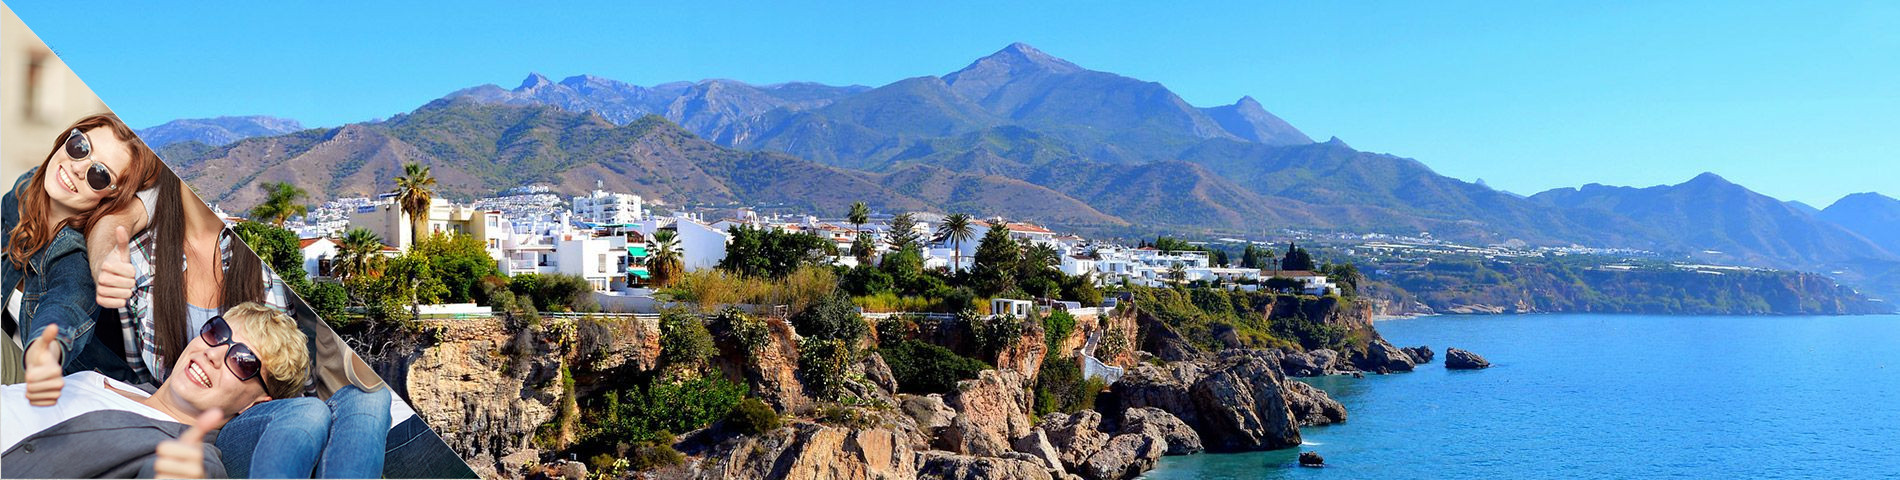 Nerja - Voyages scolaires / Groupes